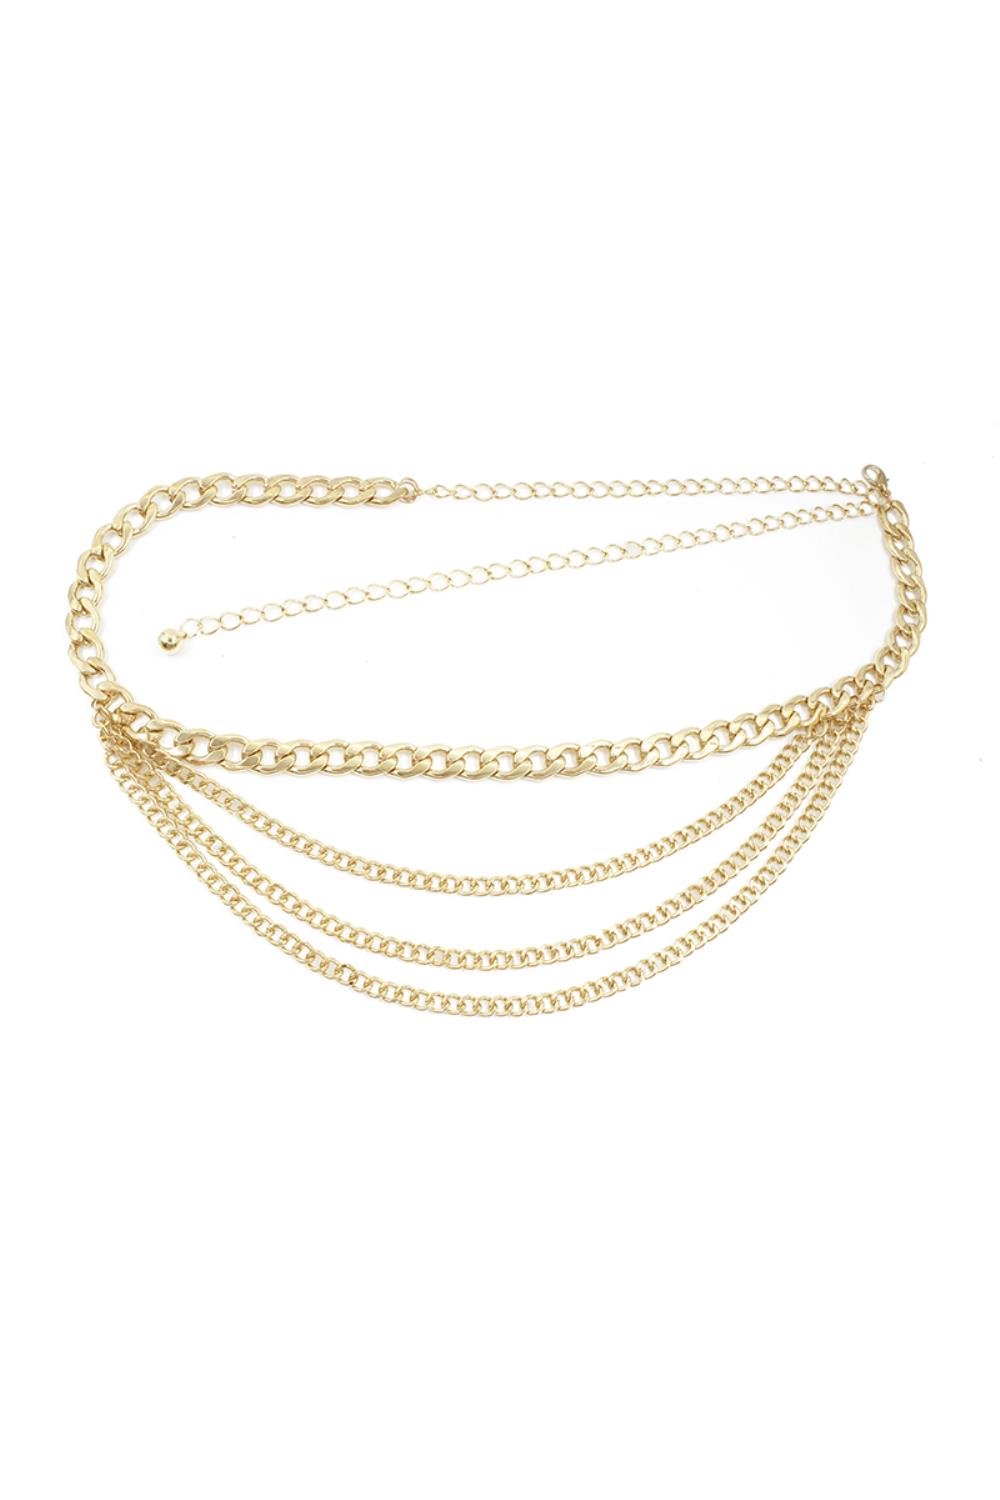 GOLD Metal Multi Chain Layered Bally Chain Belt - Ships from The US - belt at TFC&H Co.